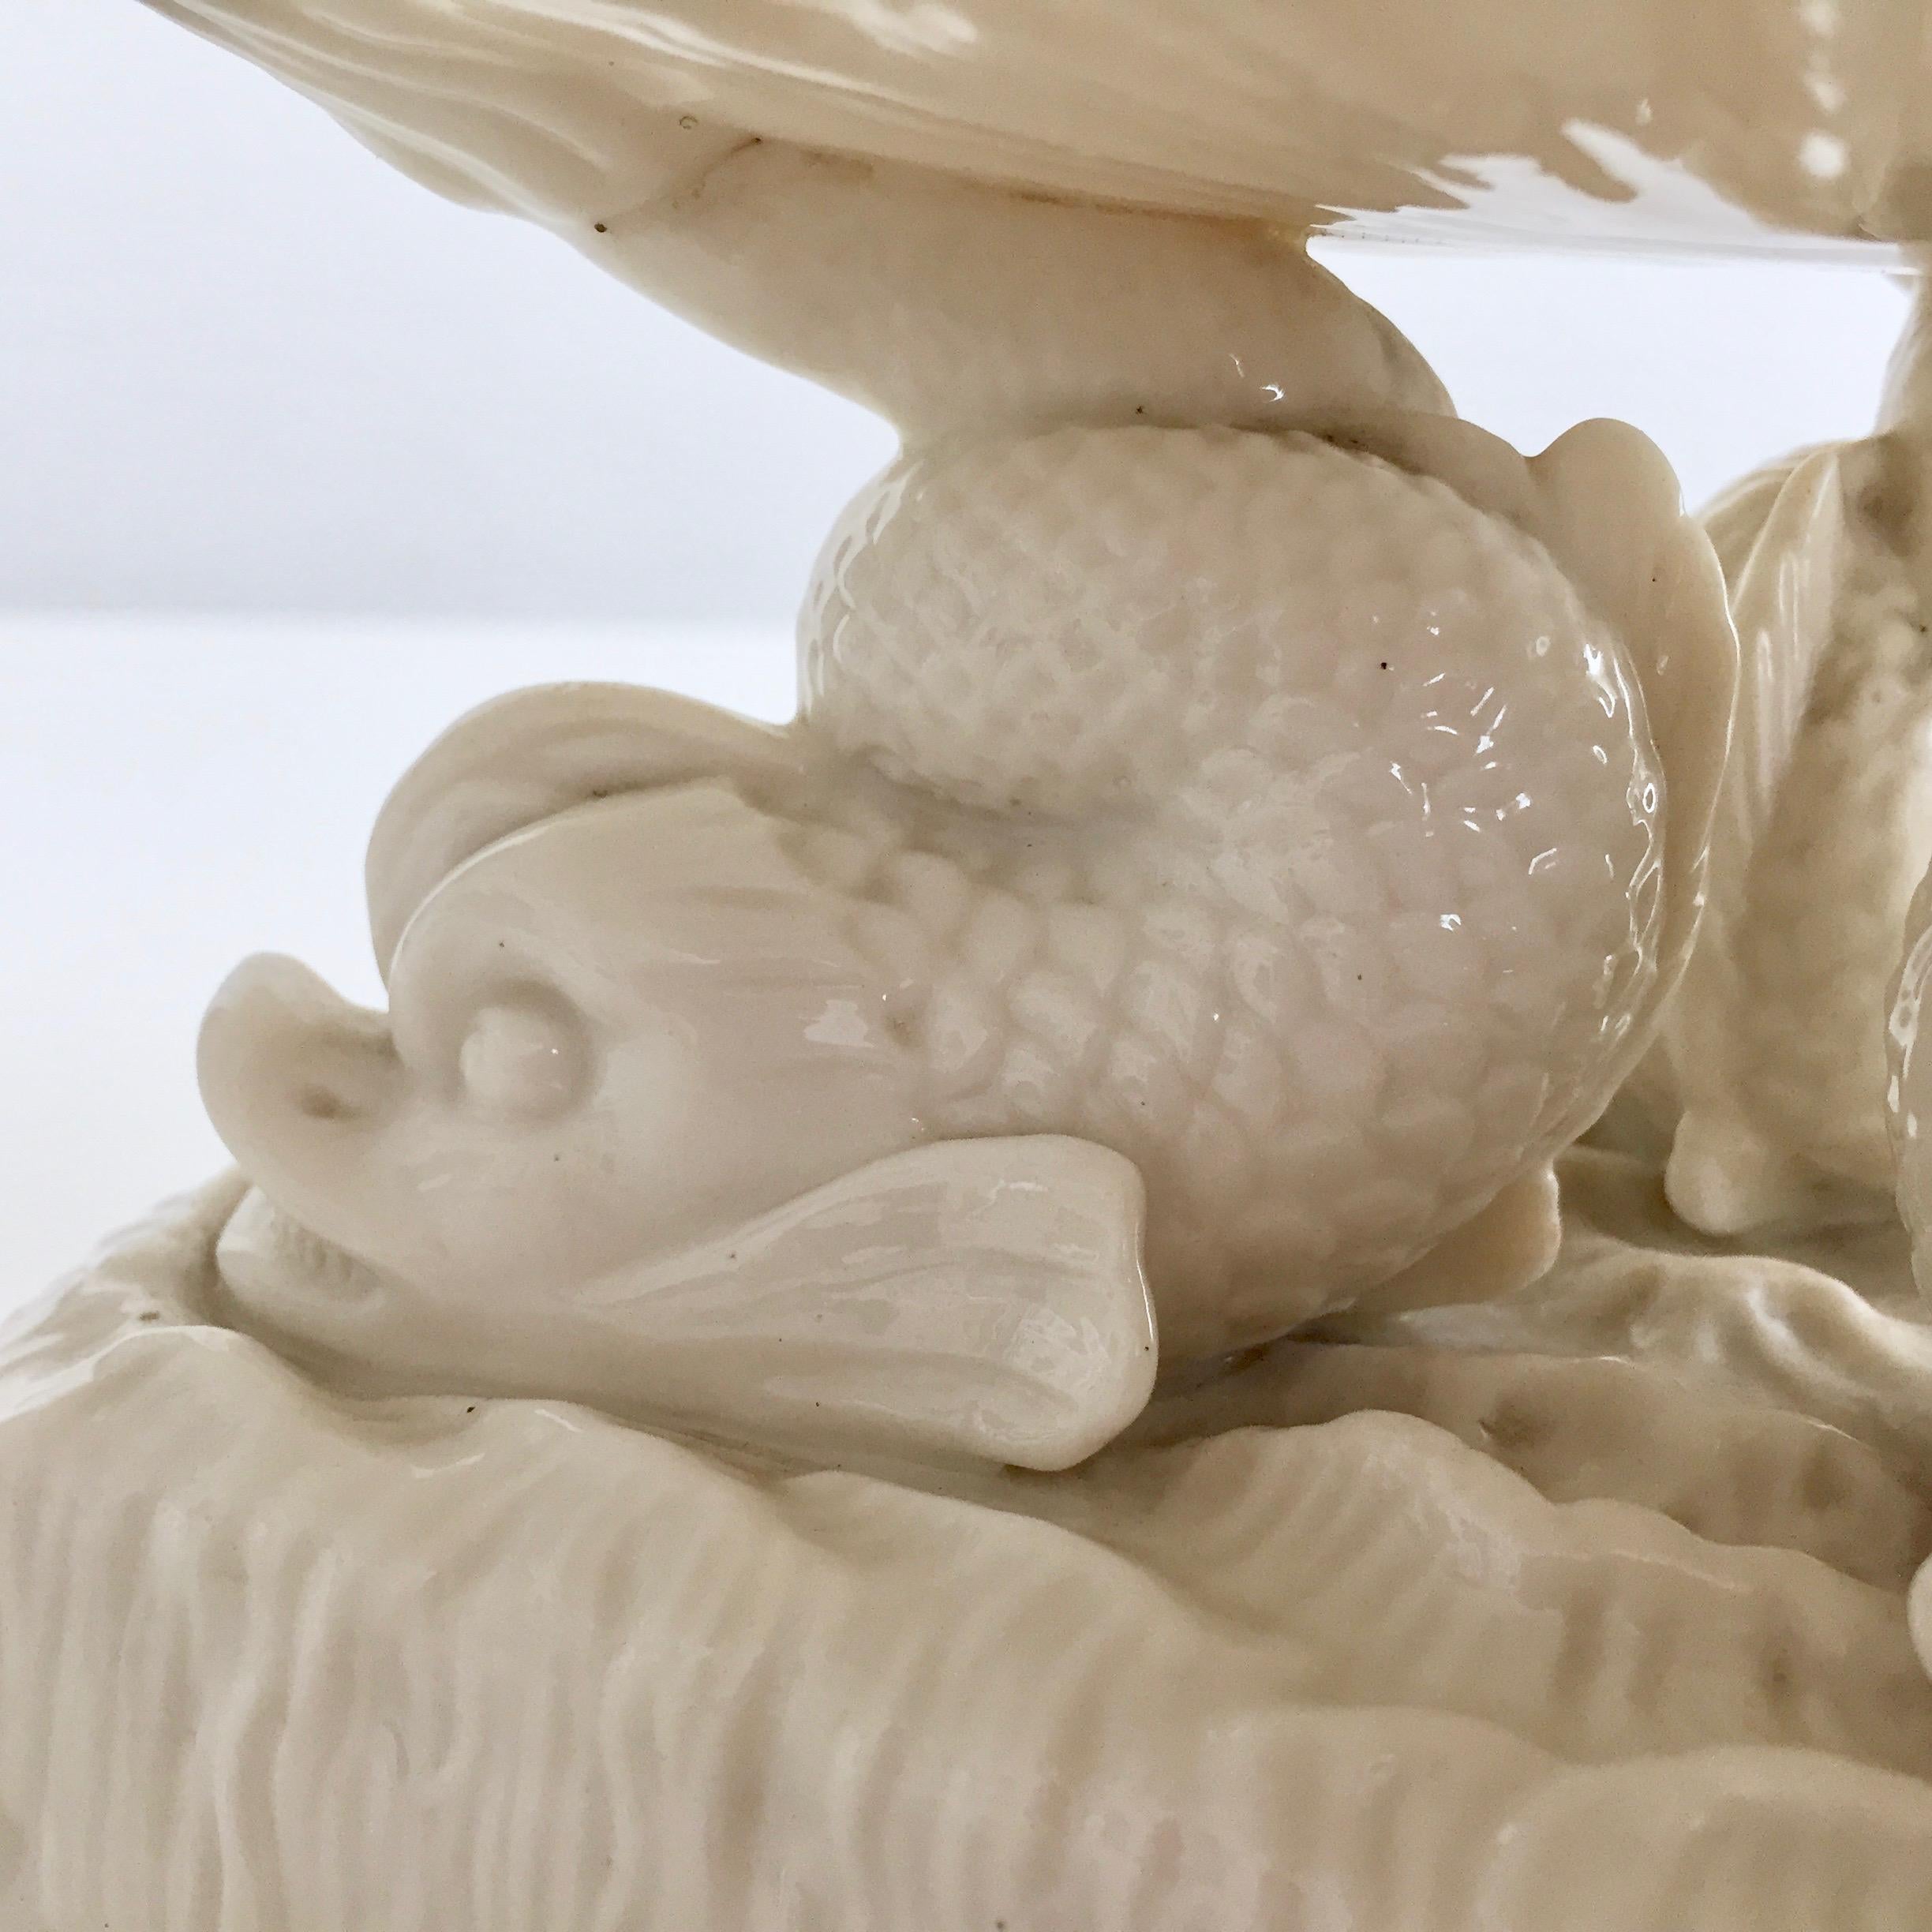 Belleek Comport, White Parian Porcelain on Dolphin Foot, Victorian, 1863-1891 2